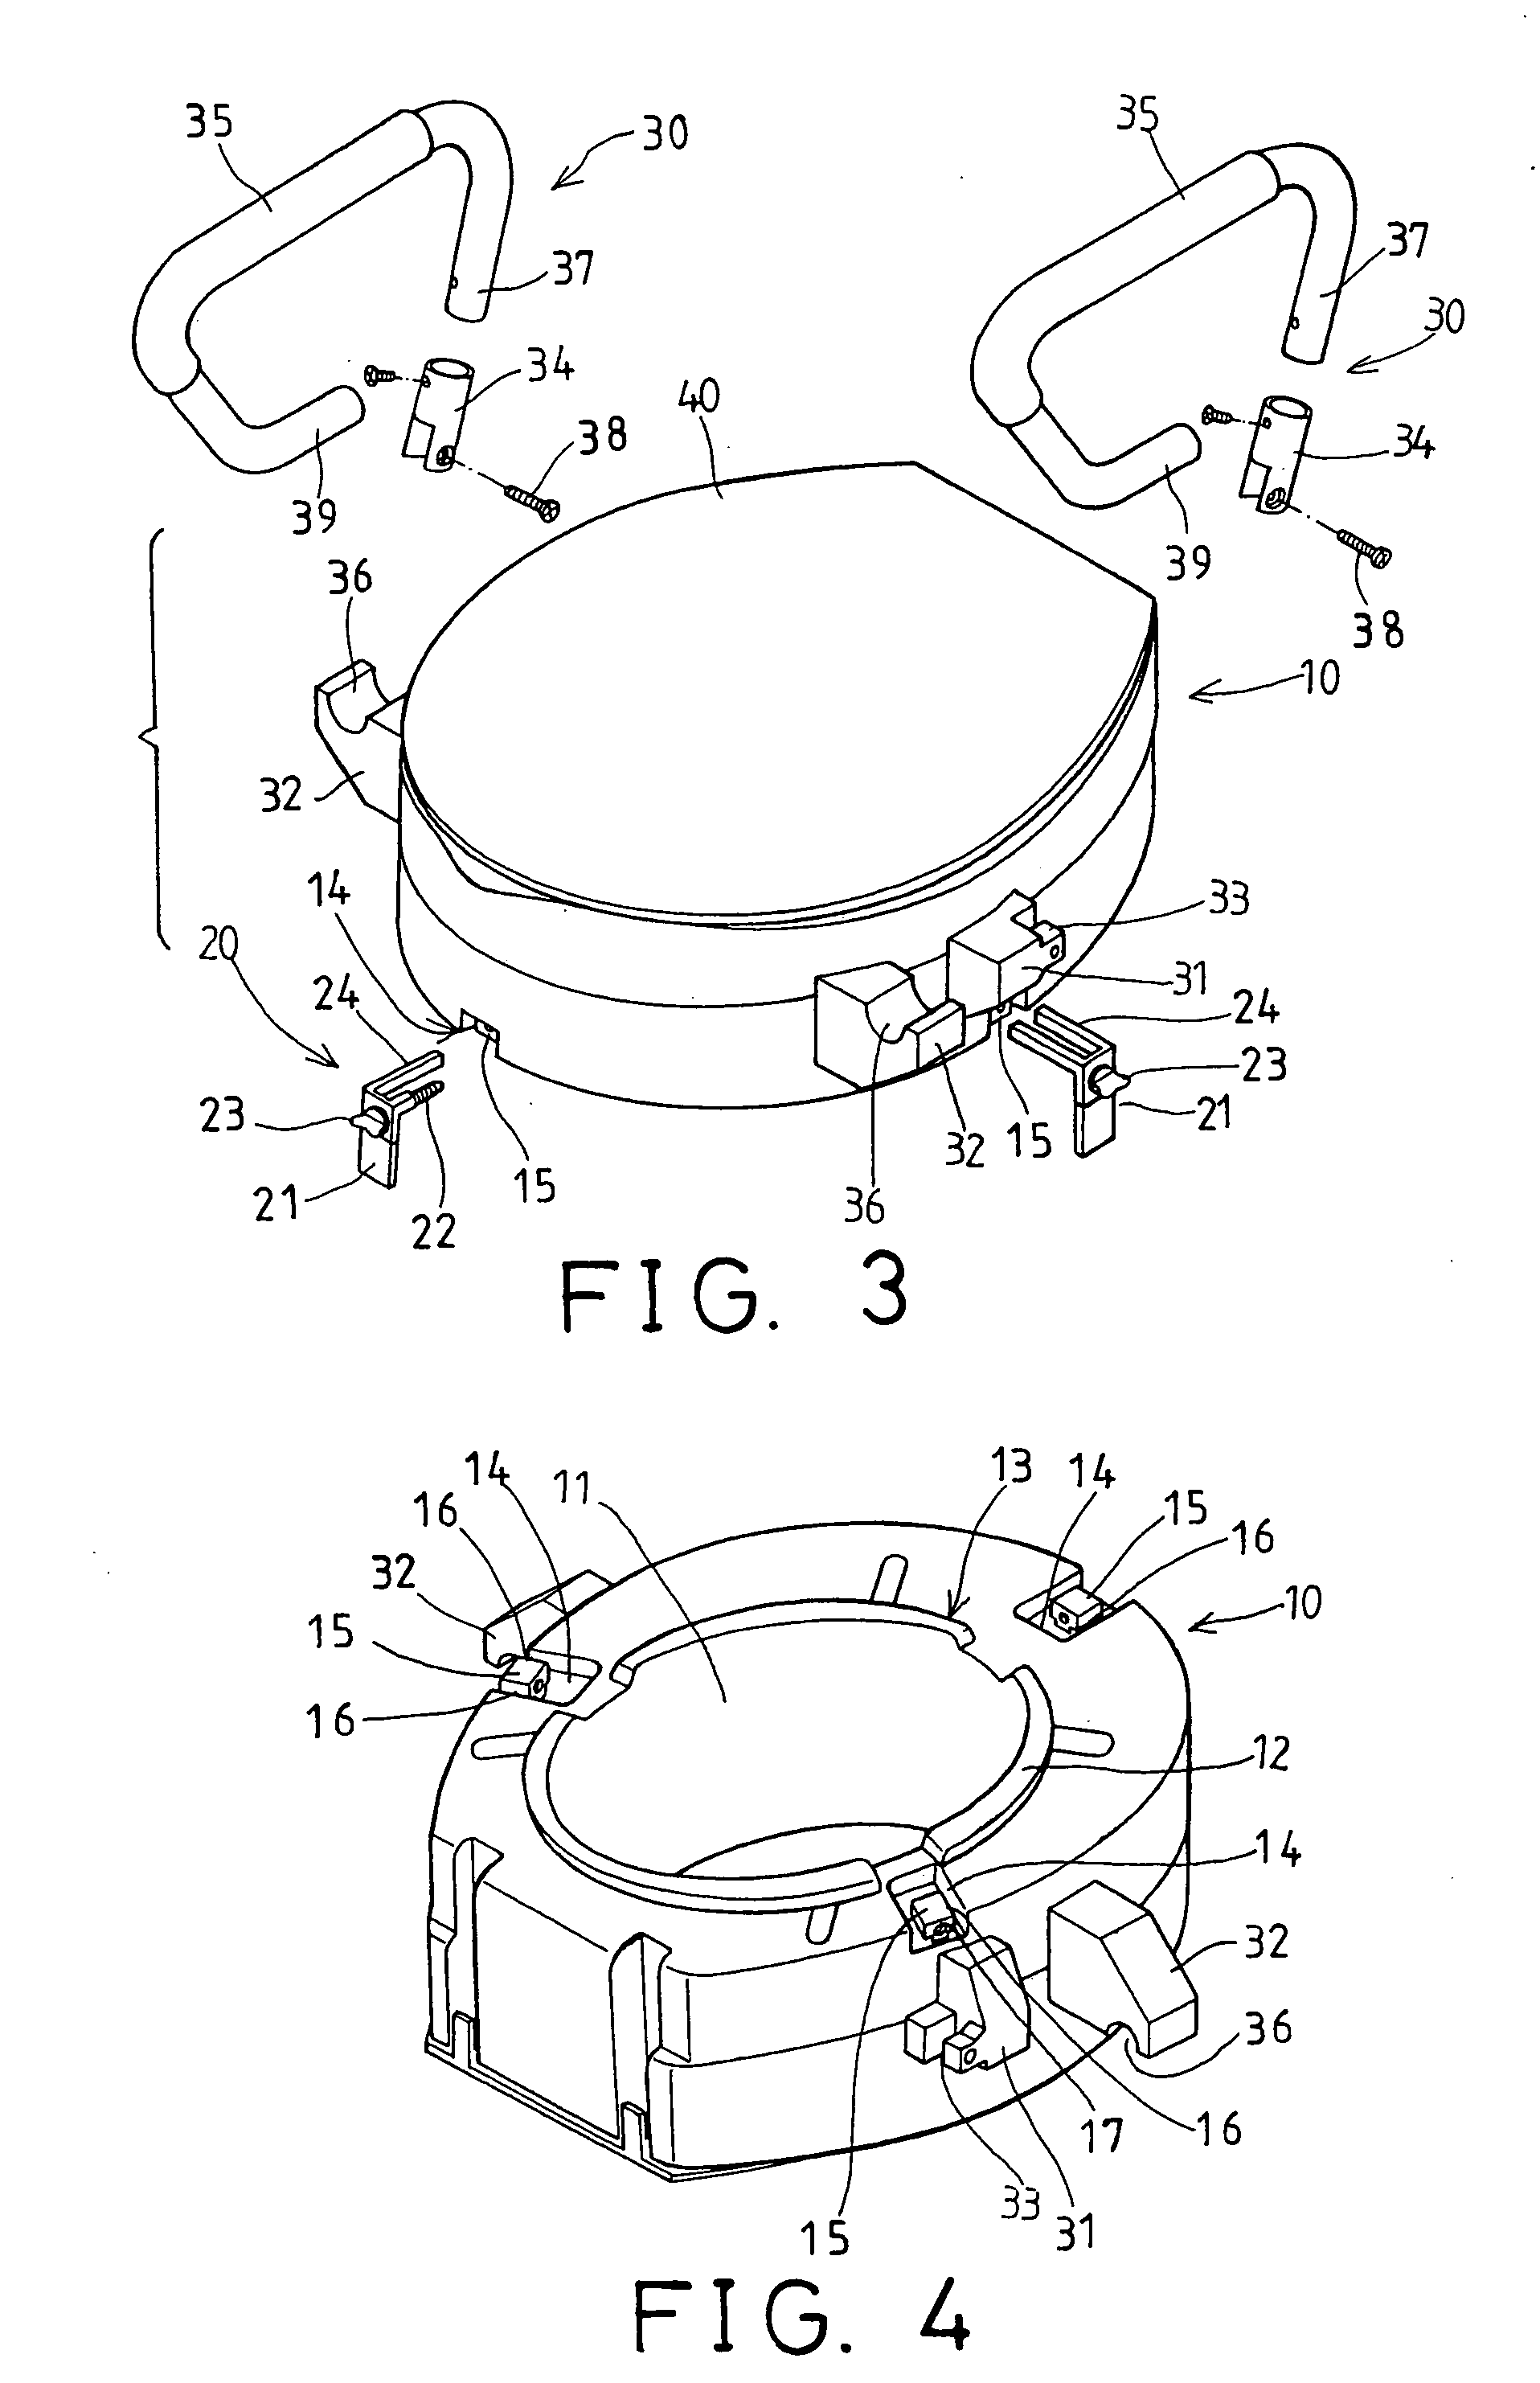 Toilet seat device for disabled person